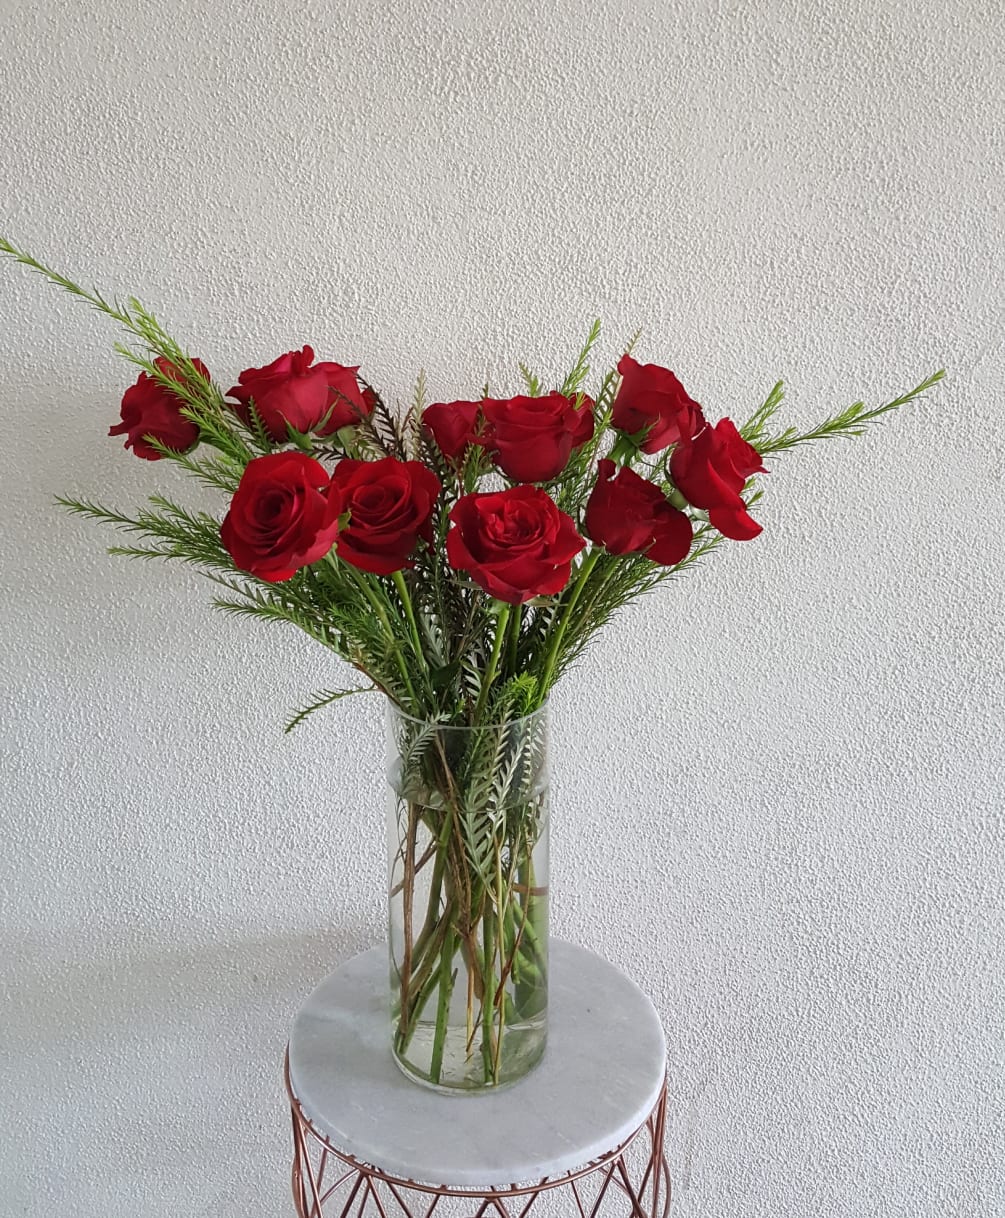 A modern and minimal style of the traditional dozen red roses for